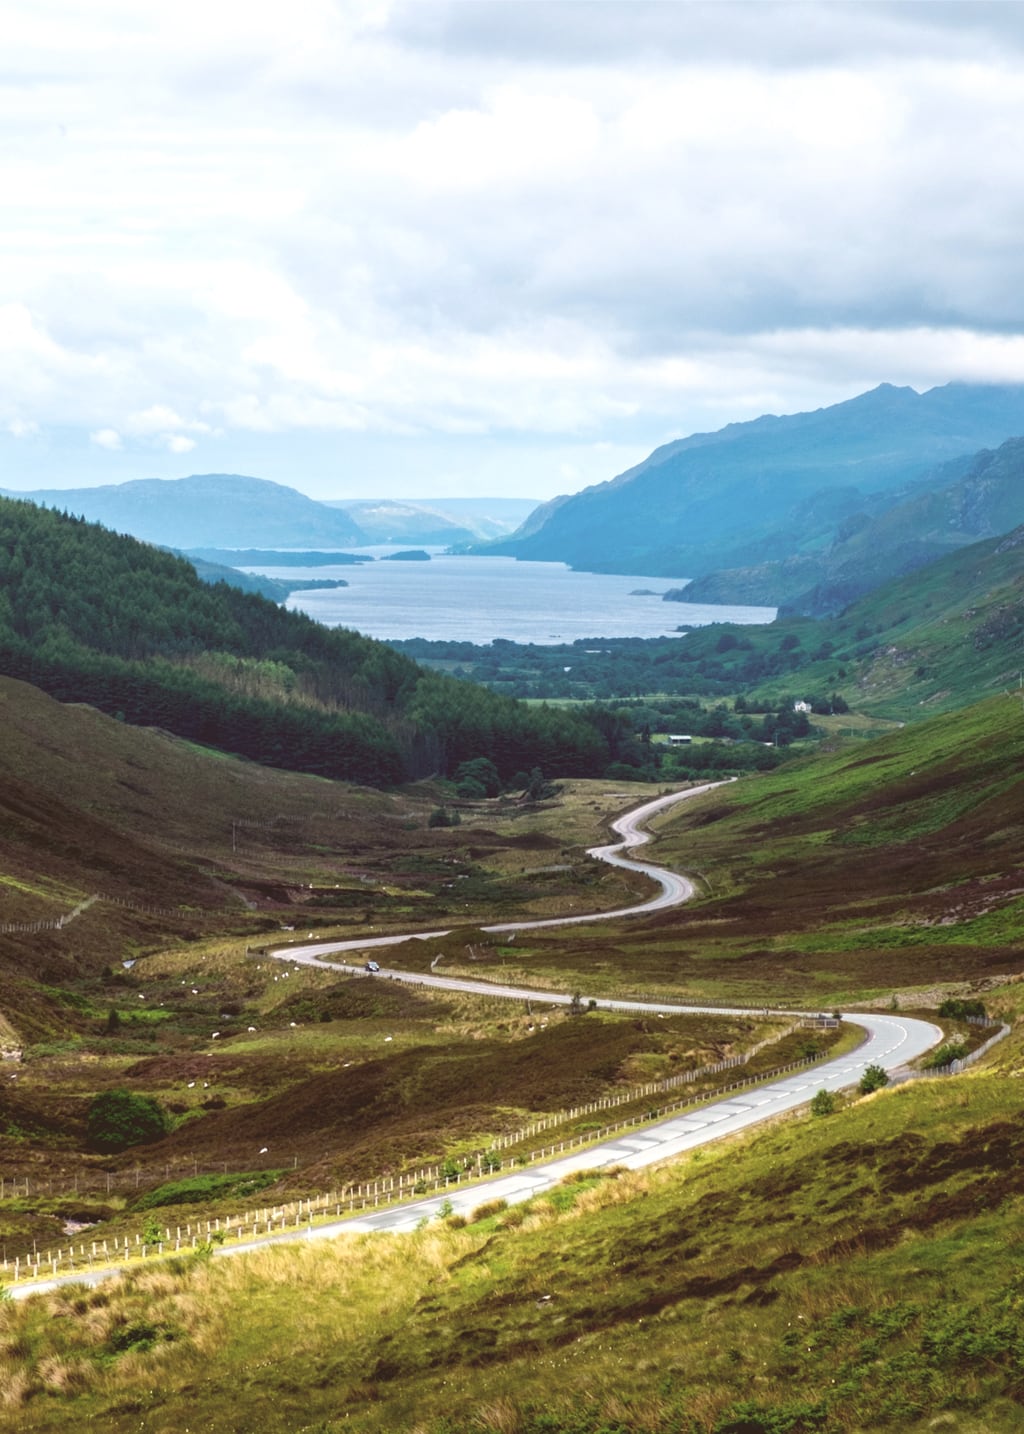 View of Loch Maree from Glen Docherty, part of the North Coast 500 Scottish scenic route